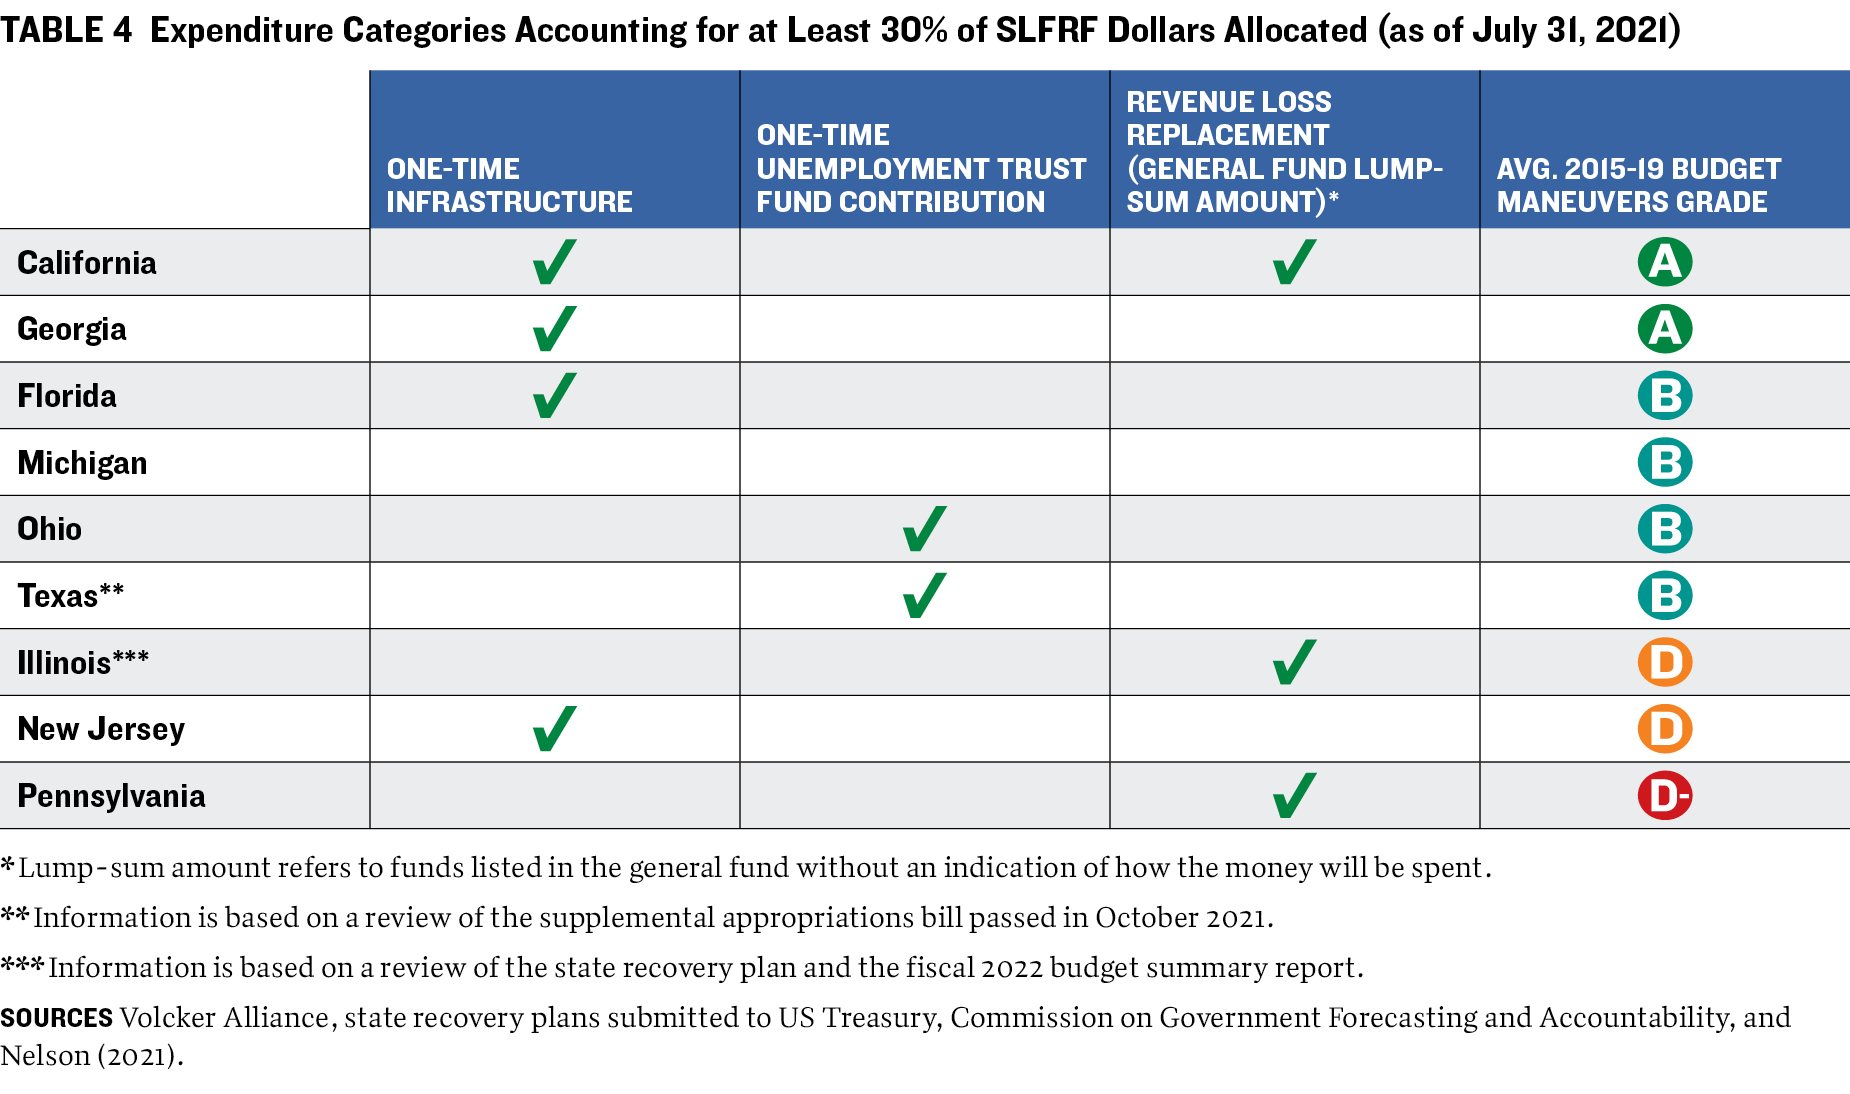 Expenditure Categories Accounting for at Least 30% of SLFRF Dollars Allocated (as of July 31, 2021)